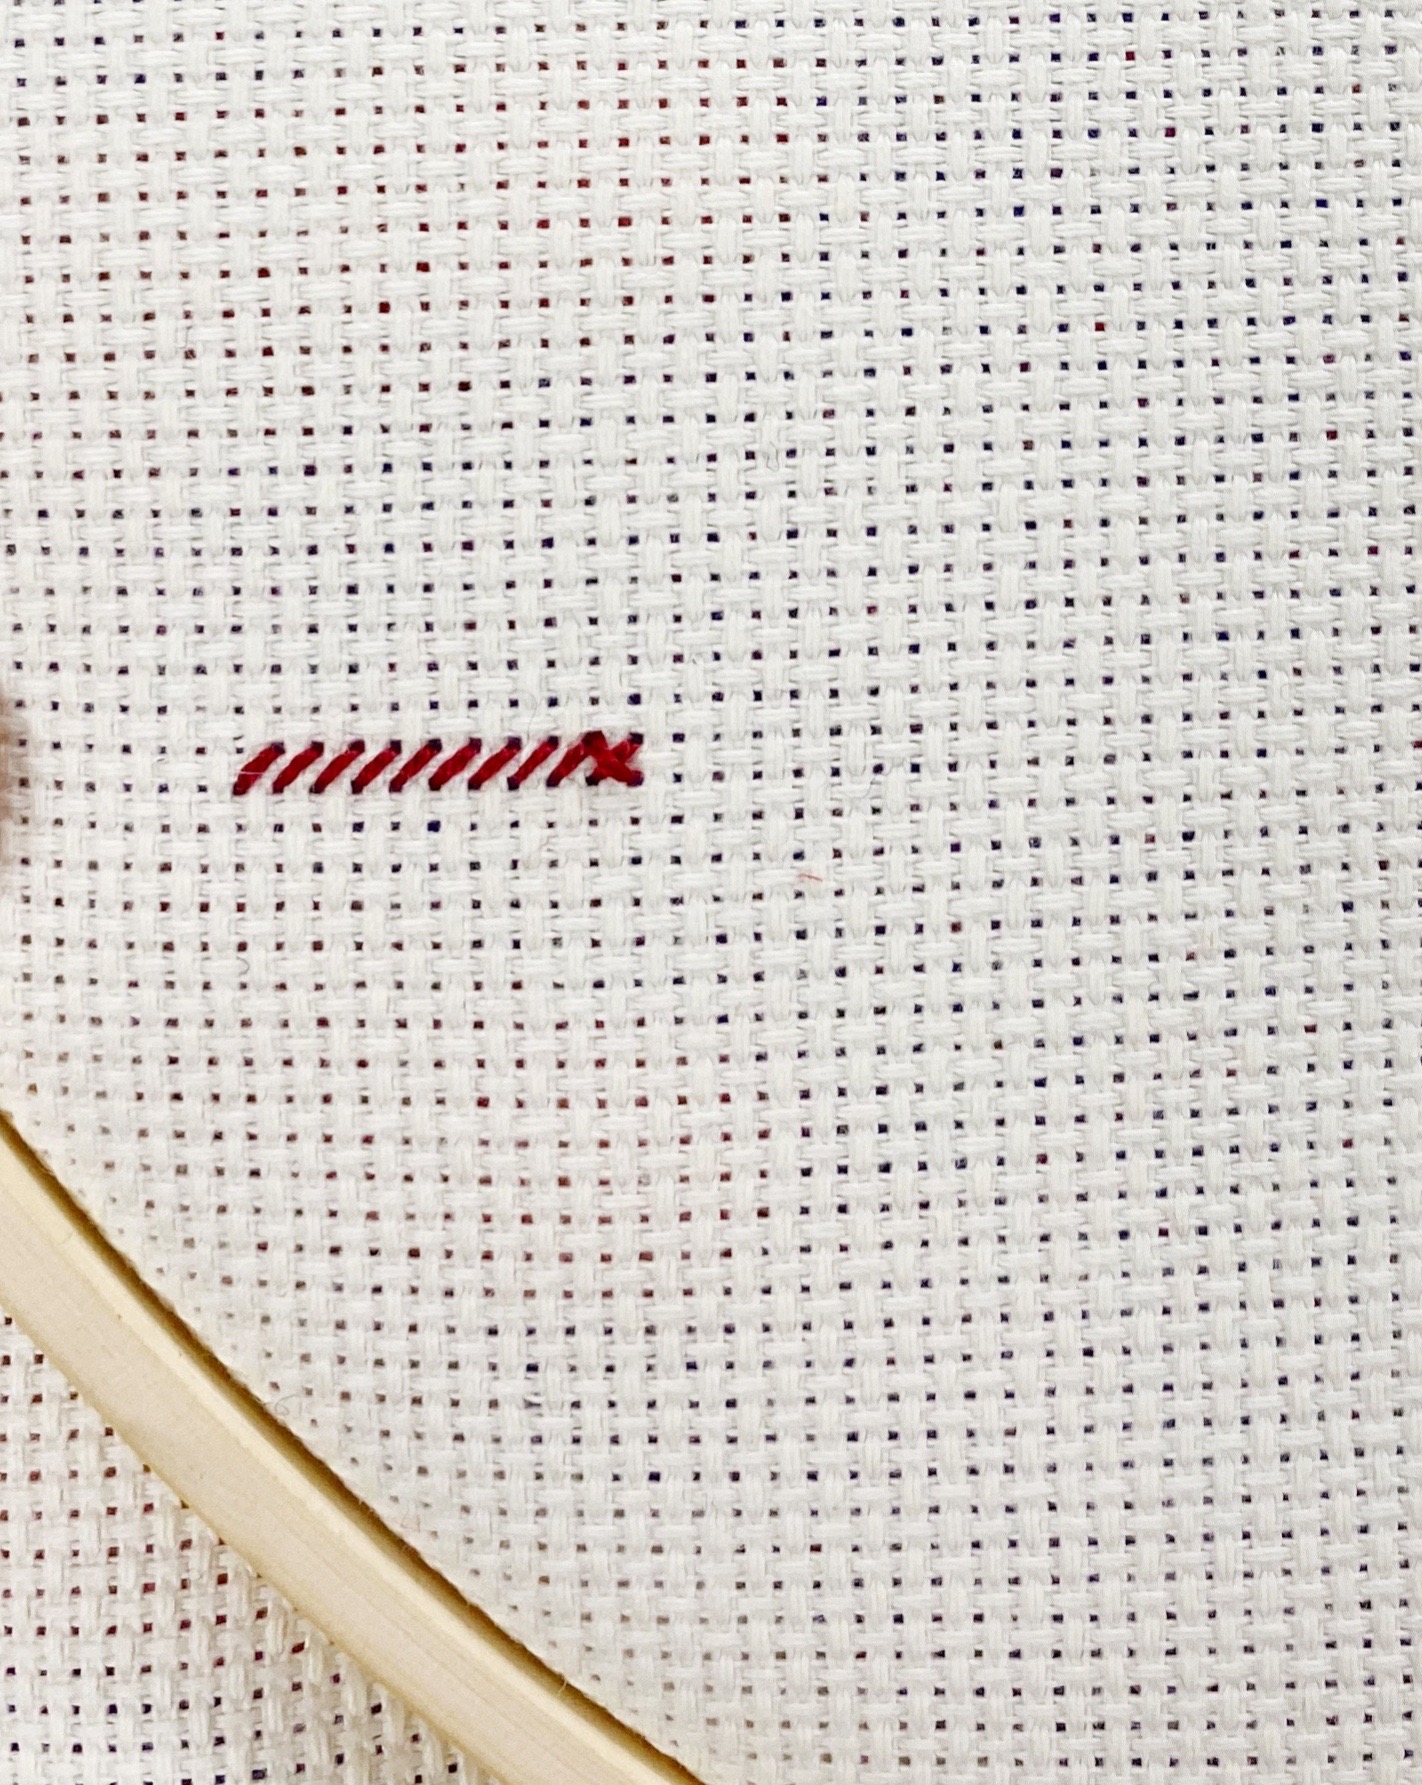 Create a row of stitches.